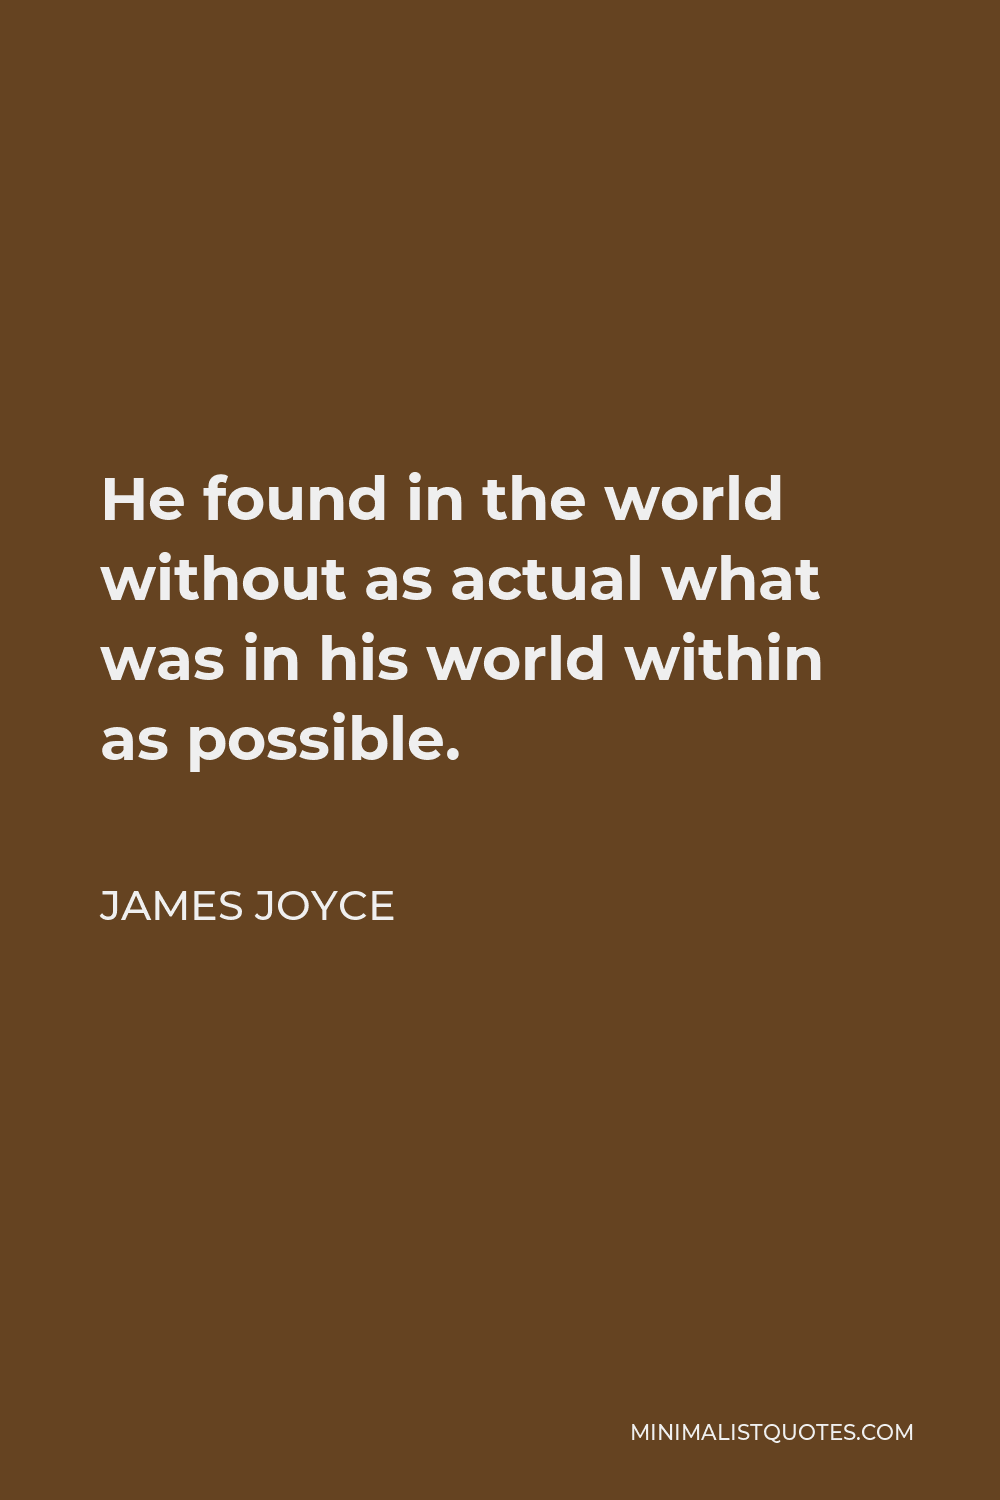 James Joyce Quote - He found in the world without as actual what was in his world within as possible.